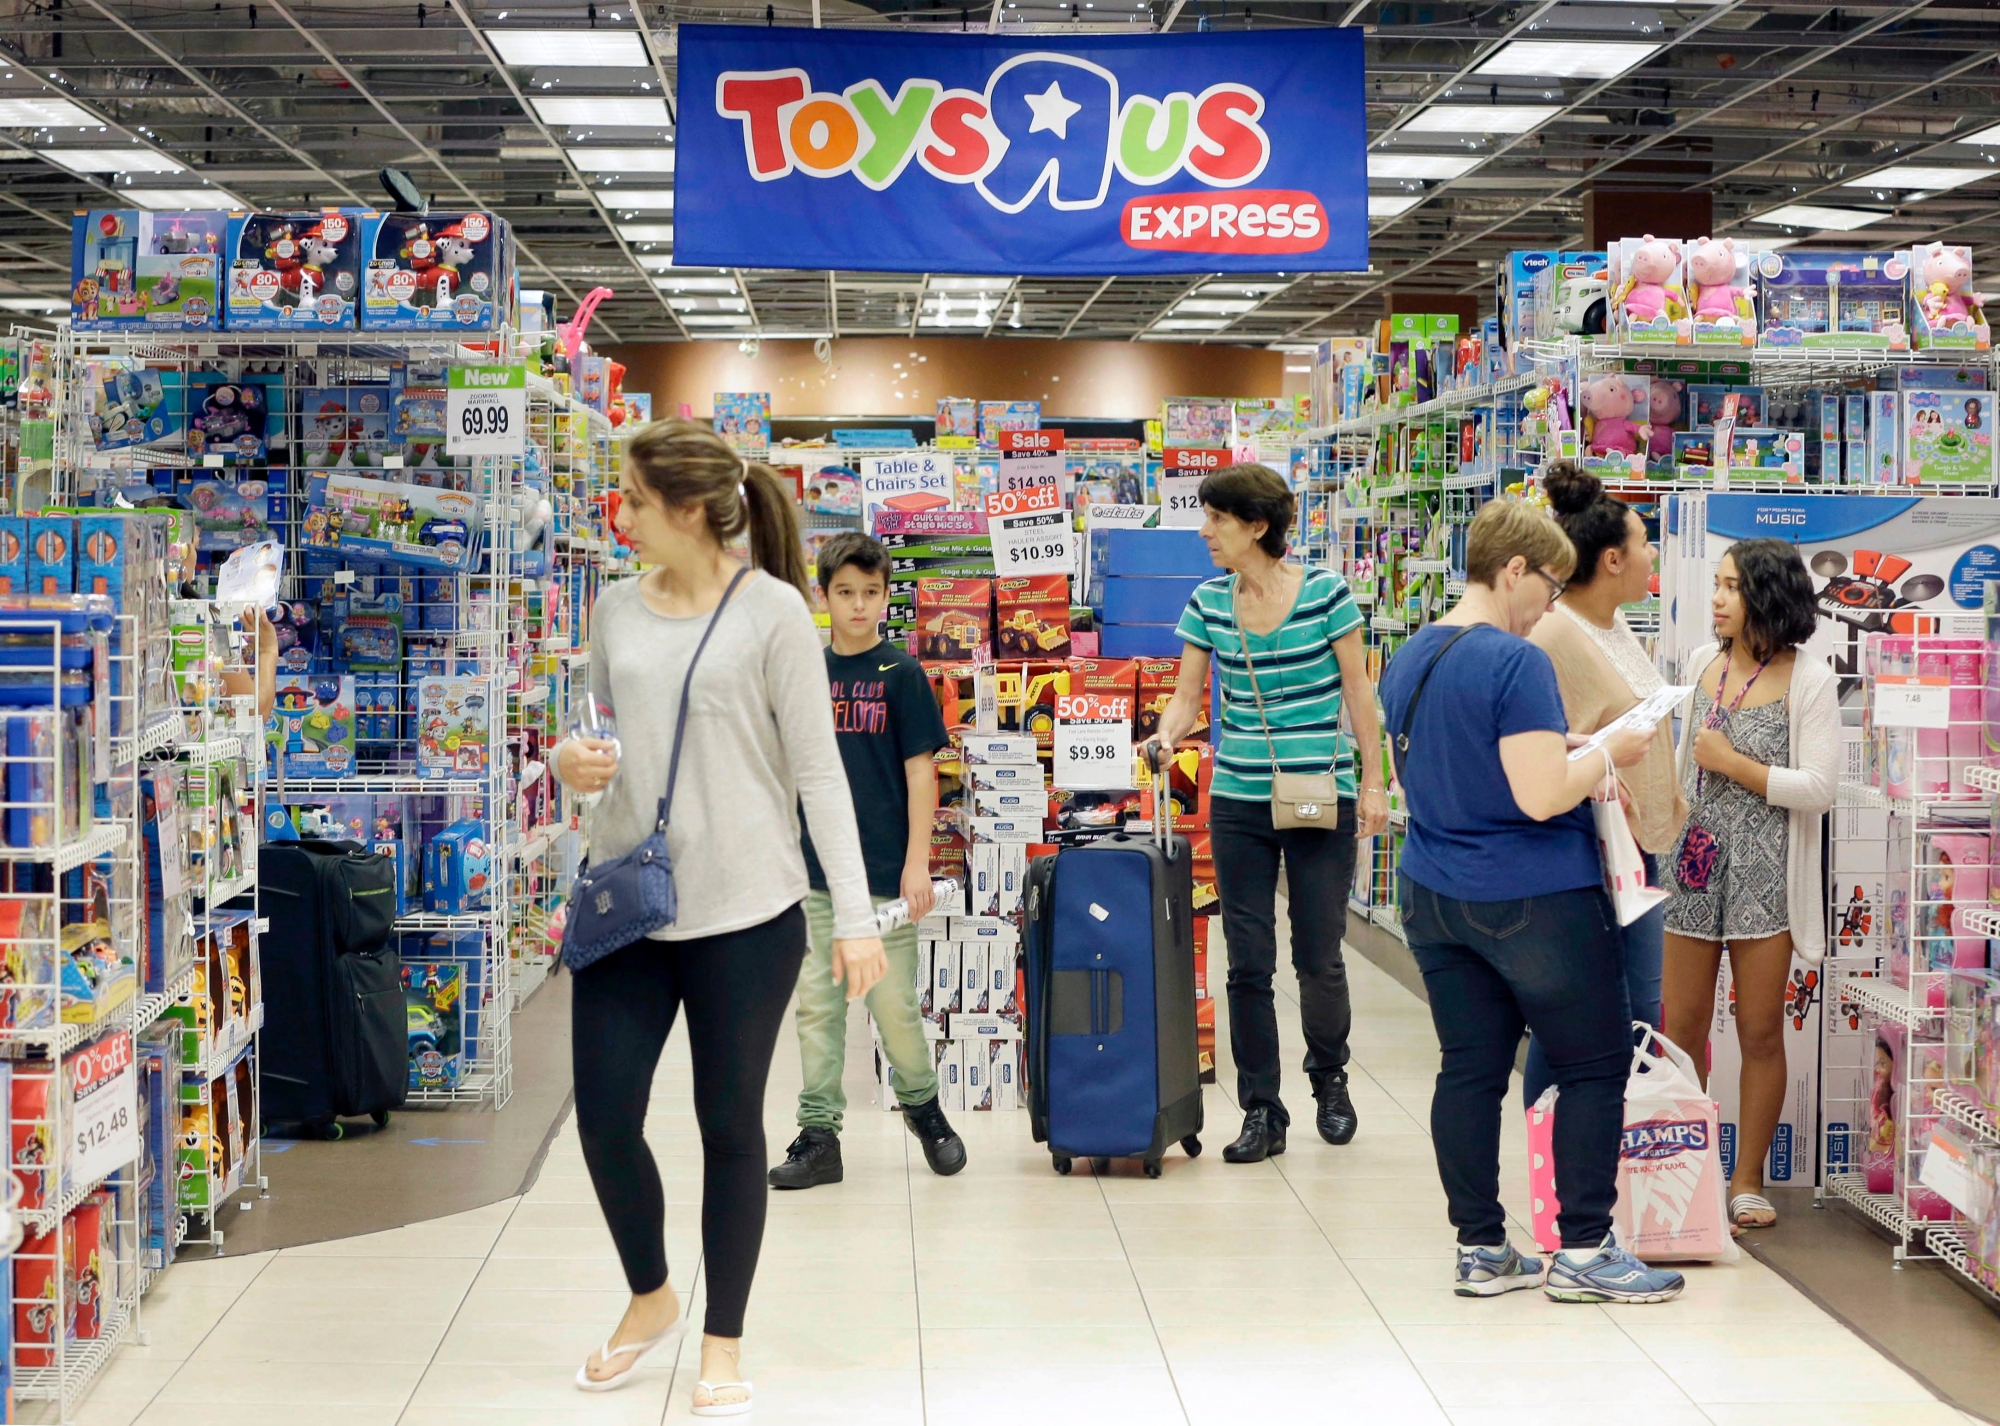 FILE - In this Friday, Nov. 25, 2016, file photo, shoppers shop in a Toys R Us store on Black Friday in Miami. Toys R Us, the pioneering big box toy retailer, announced late Monday, Sept. 18, 2017 it has filed for Chapter 11 bankruptcy protection while continuing with normal business operations. (AP Photo/Alan Diaz, File) Toys R Us